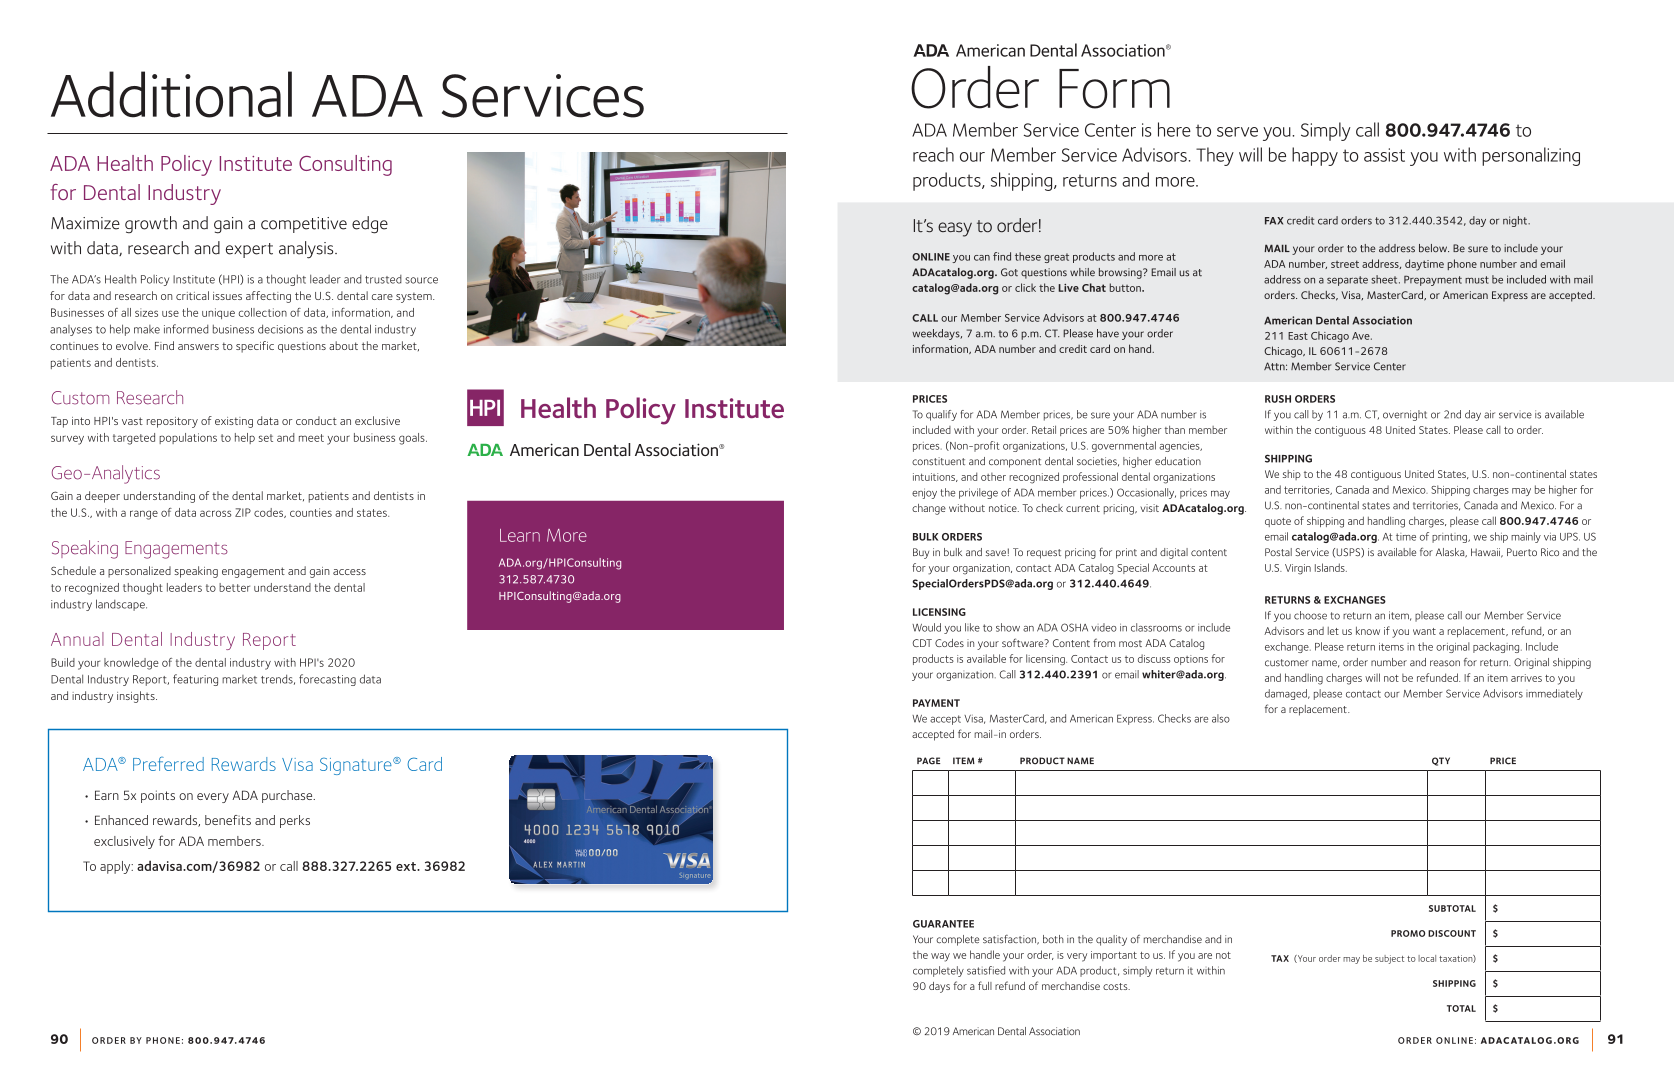 ADA Catalog 2020 (published in January 2020) page 46